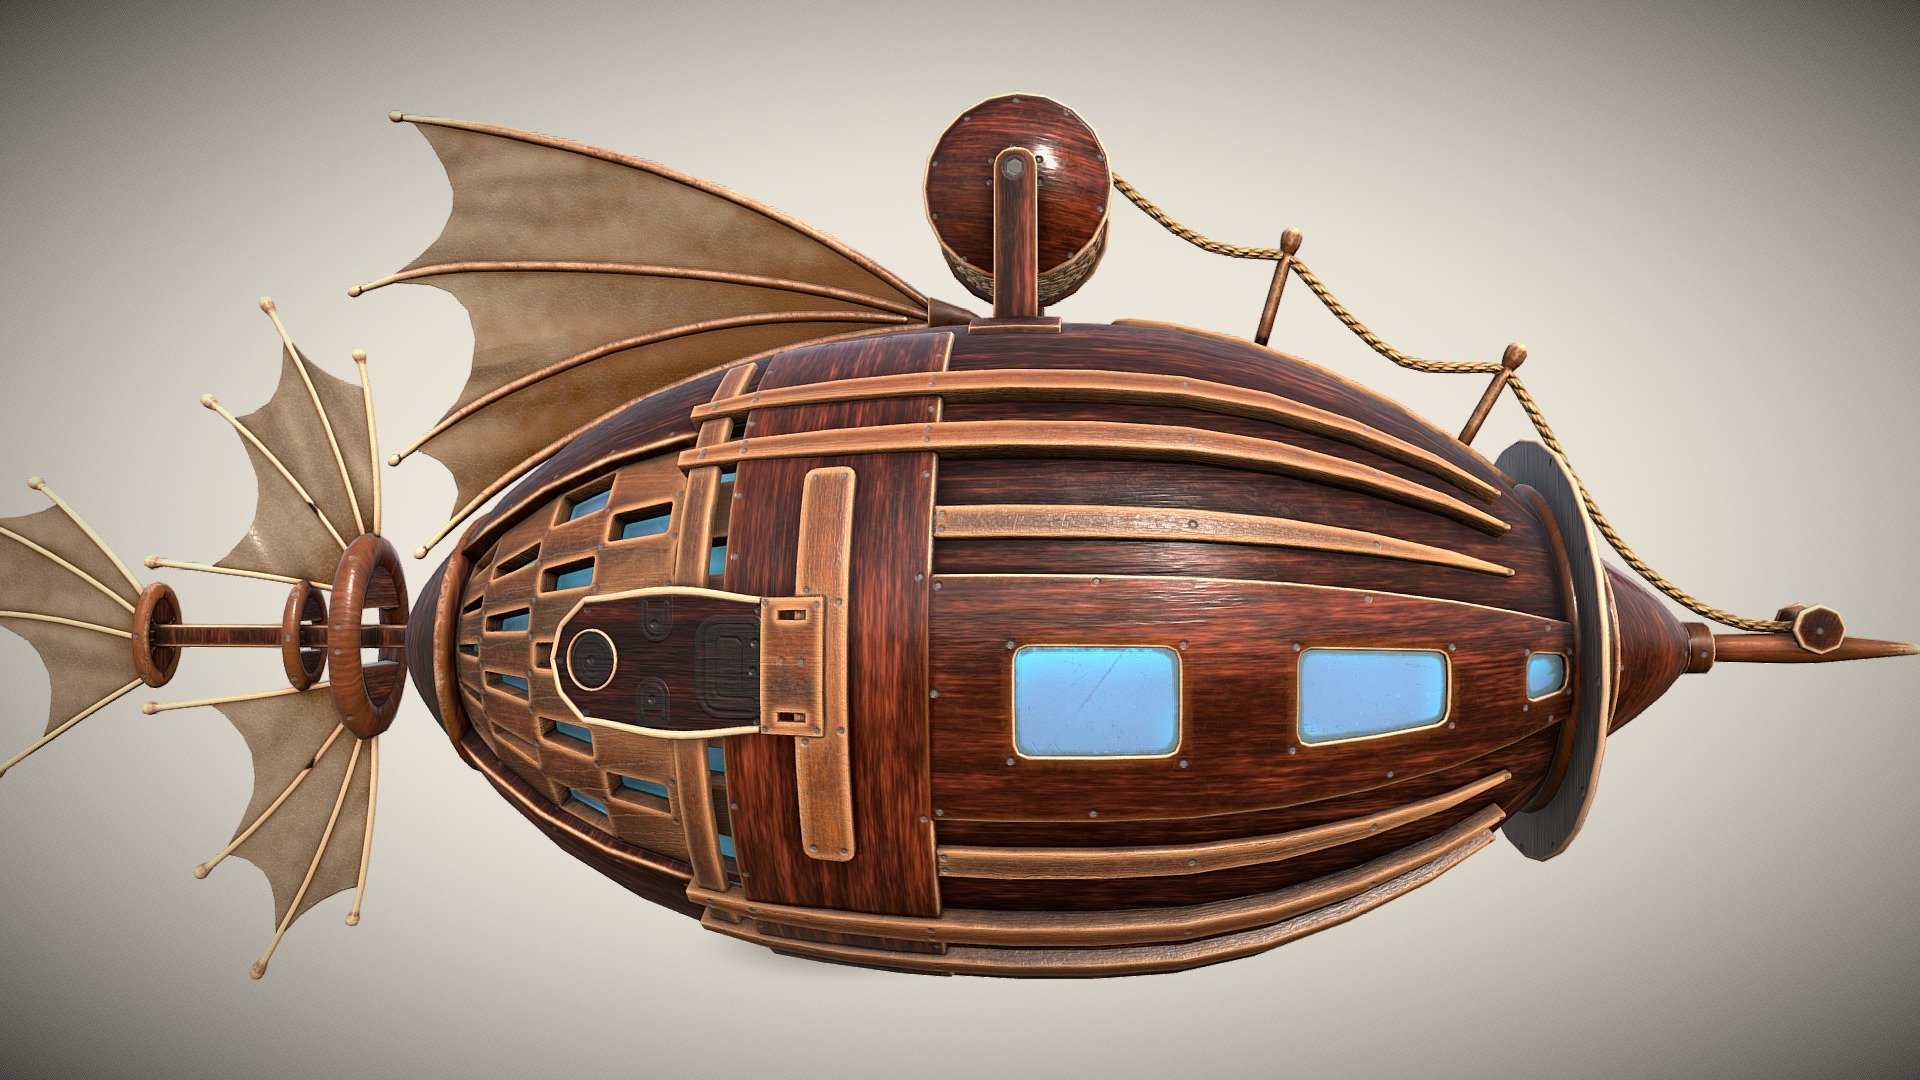 Airship PBR low-poly game ready
all models are separated
Polygons 12763
Vertices 13646 - Airship PBR low-poly game ready - Buy Royalty Free 3D model by Svetlana07 3d model